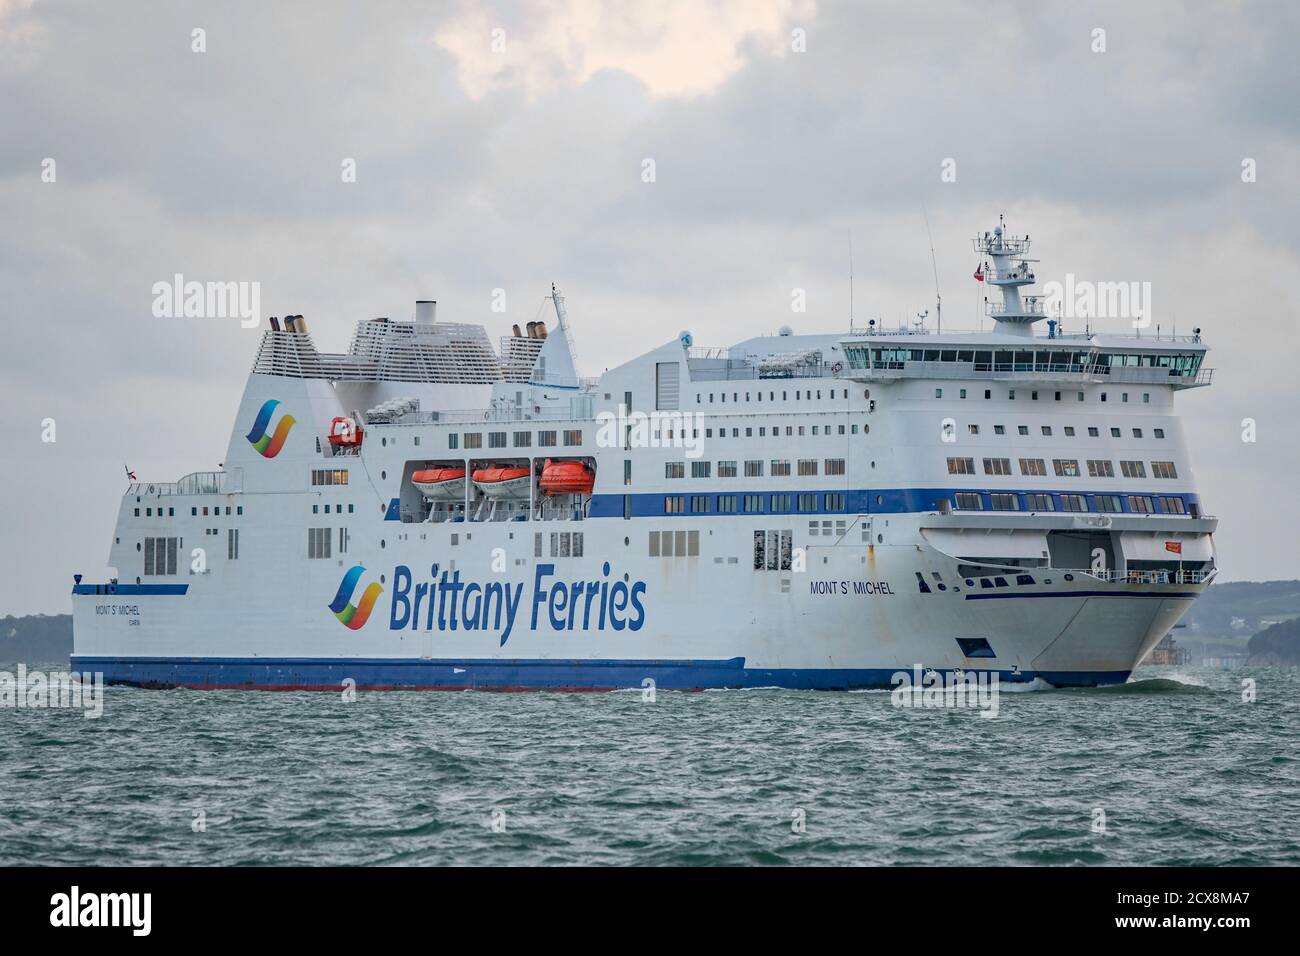 The Brittany Ferries MV Mont St Michel making an evening arrival at Portsmouth, UK on the 23rd September 2020. Stock Photo